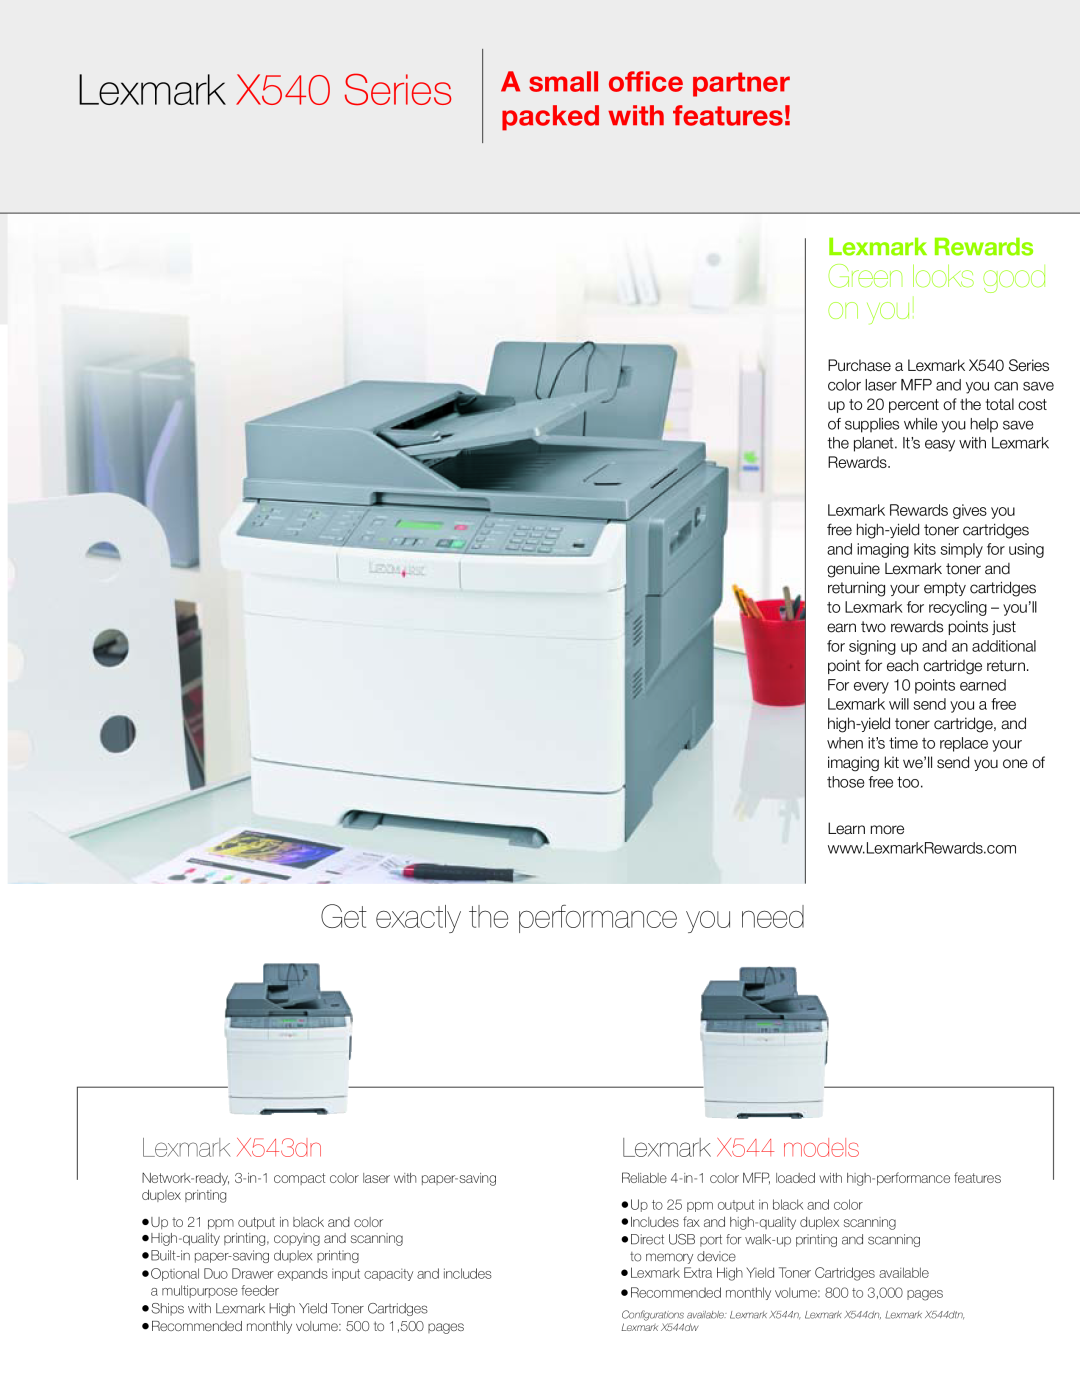 Lexmark X544 models Get exactly the performance you need, Lexmark X540 Series, Green looks good on you, Lexmark X543dn 